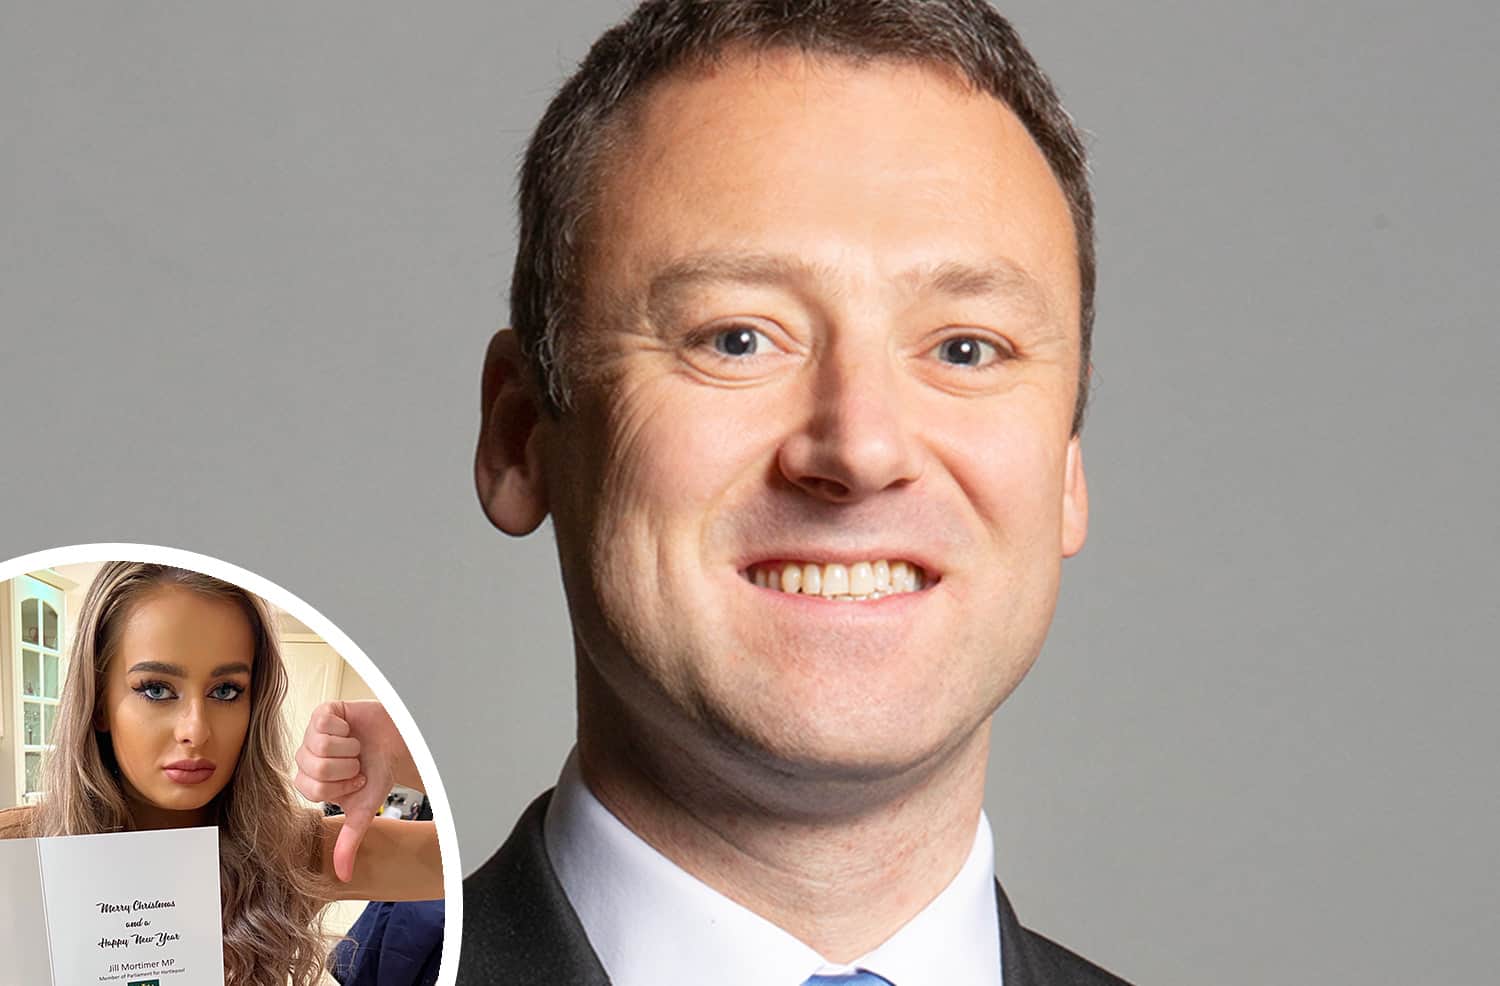 Tory MP criticised for mocking young woman’s skin